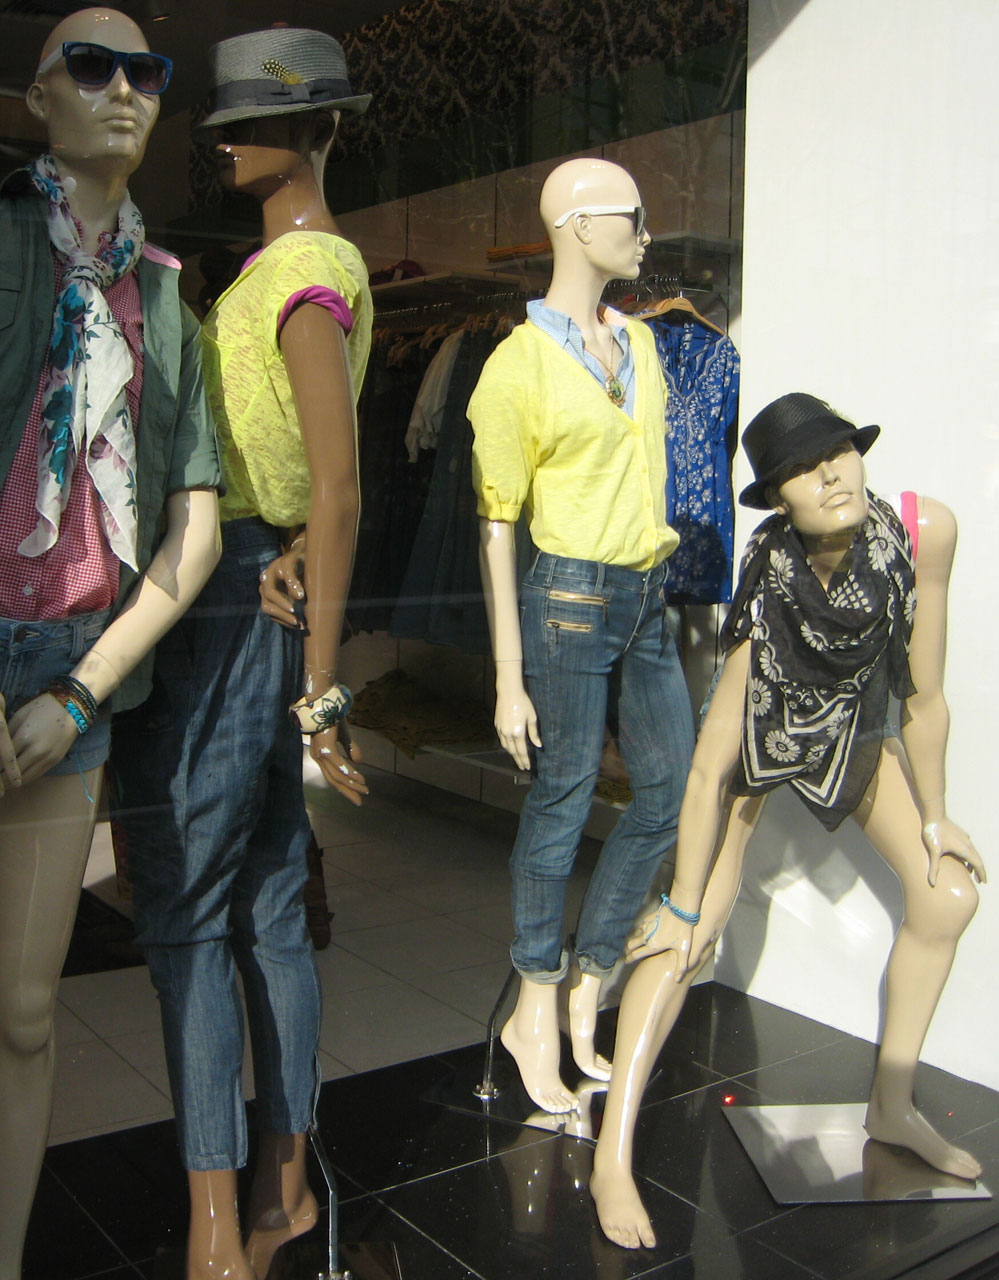 Display window with uniquely posed mannequins